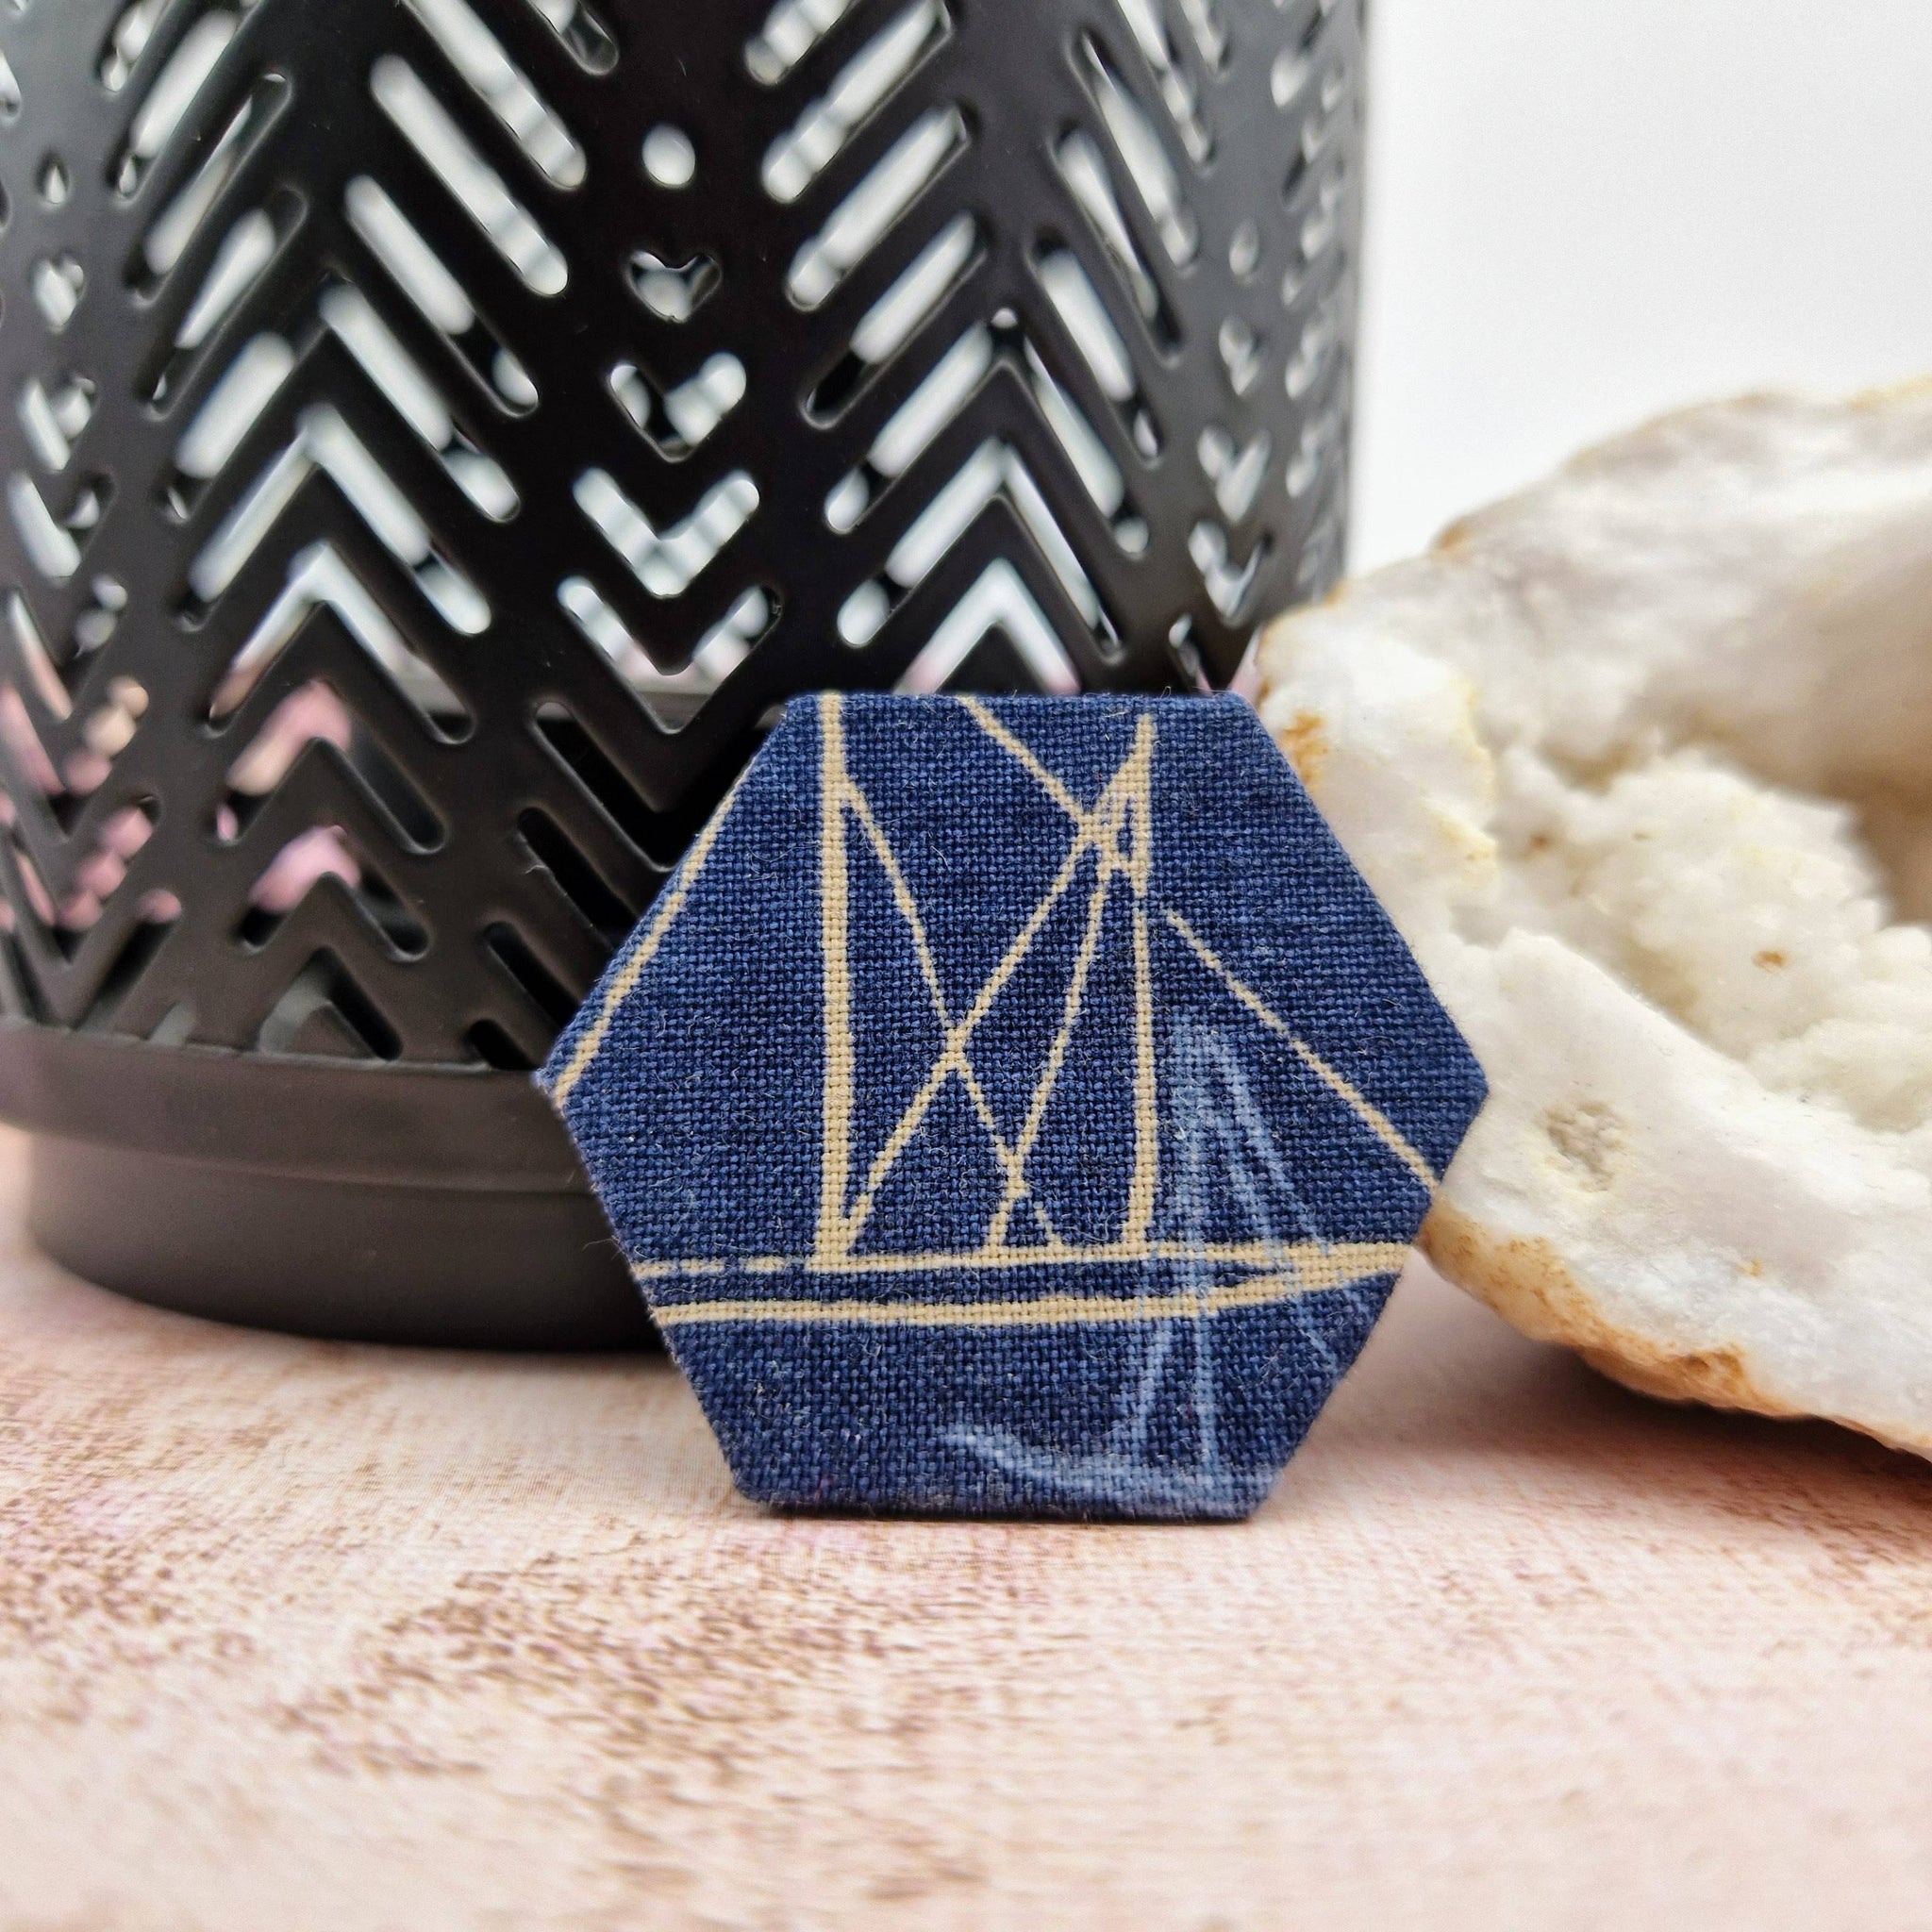 Blue hexagonal Brooch with a boat